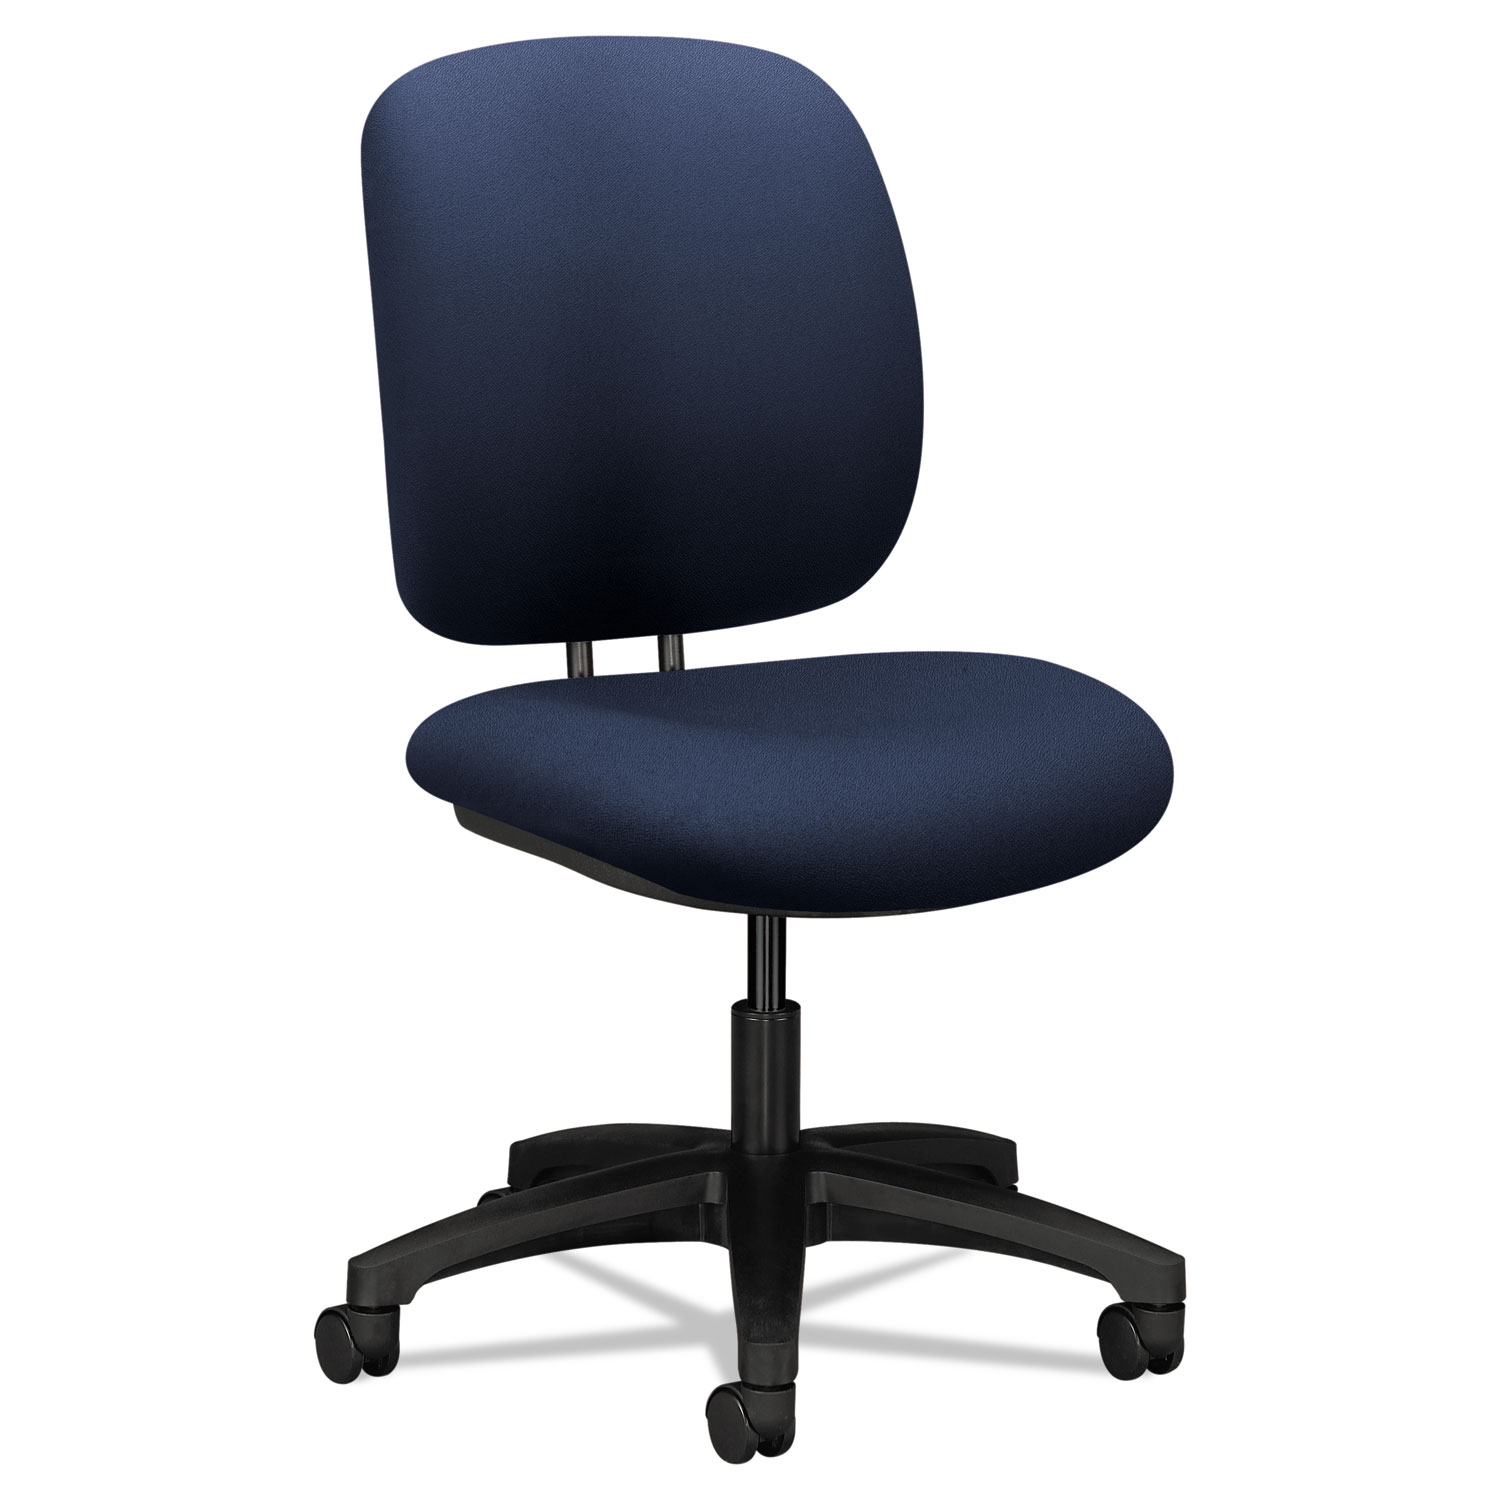  HON H5901.H.CU98.T ComforTask Task Swivel Chair, Supports up to 300 lbs., Navy Seat, Navy Back, Black Base (HON5901CU98T) 